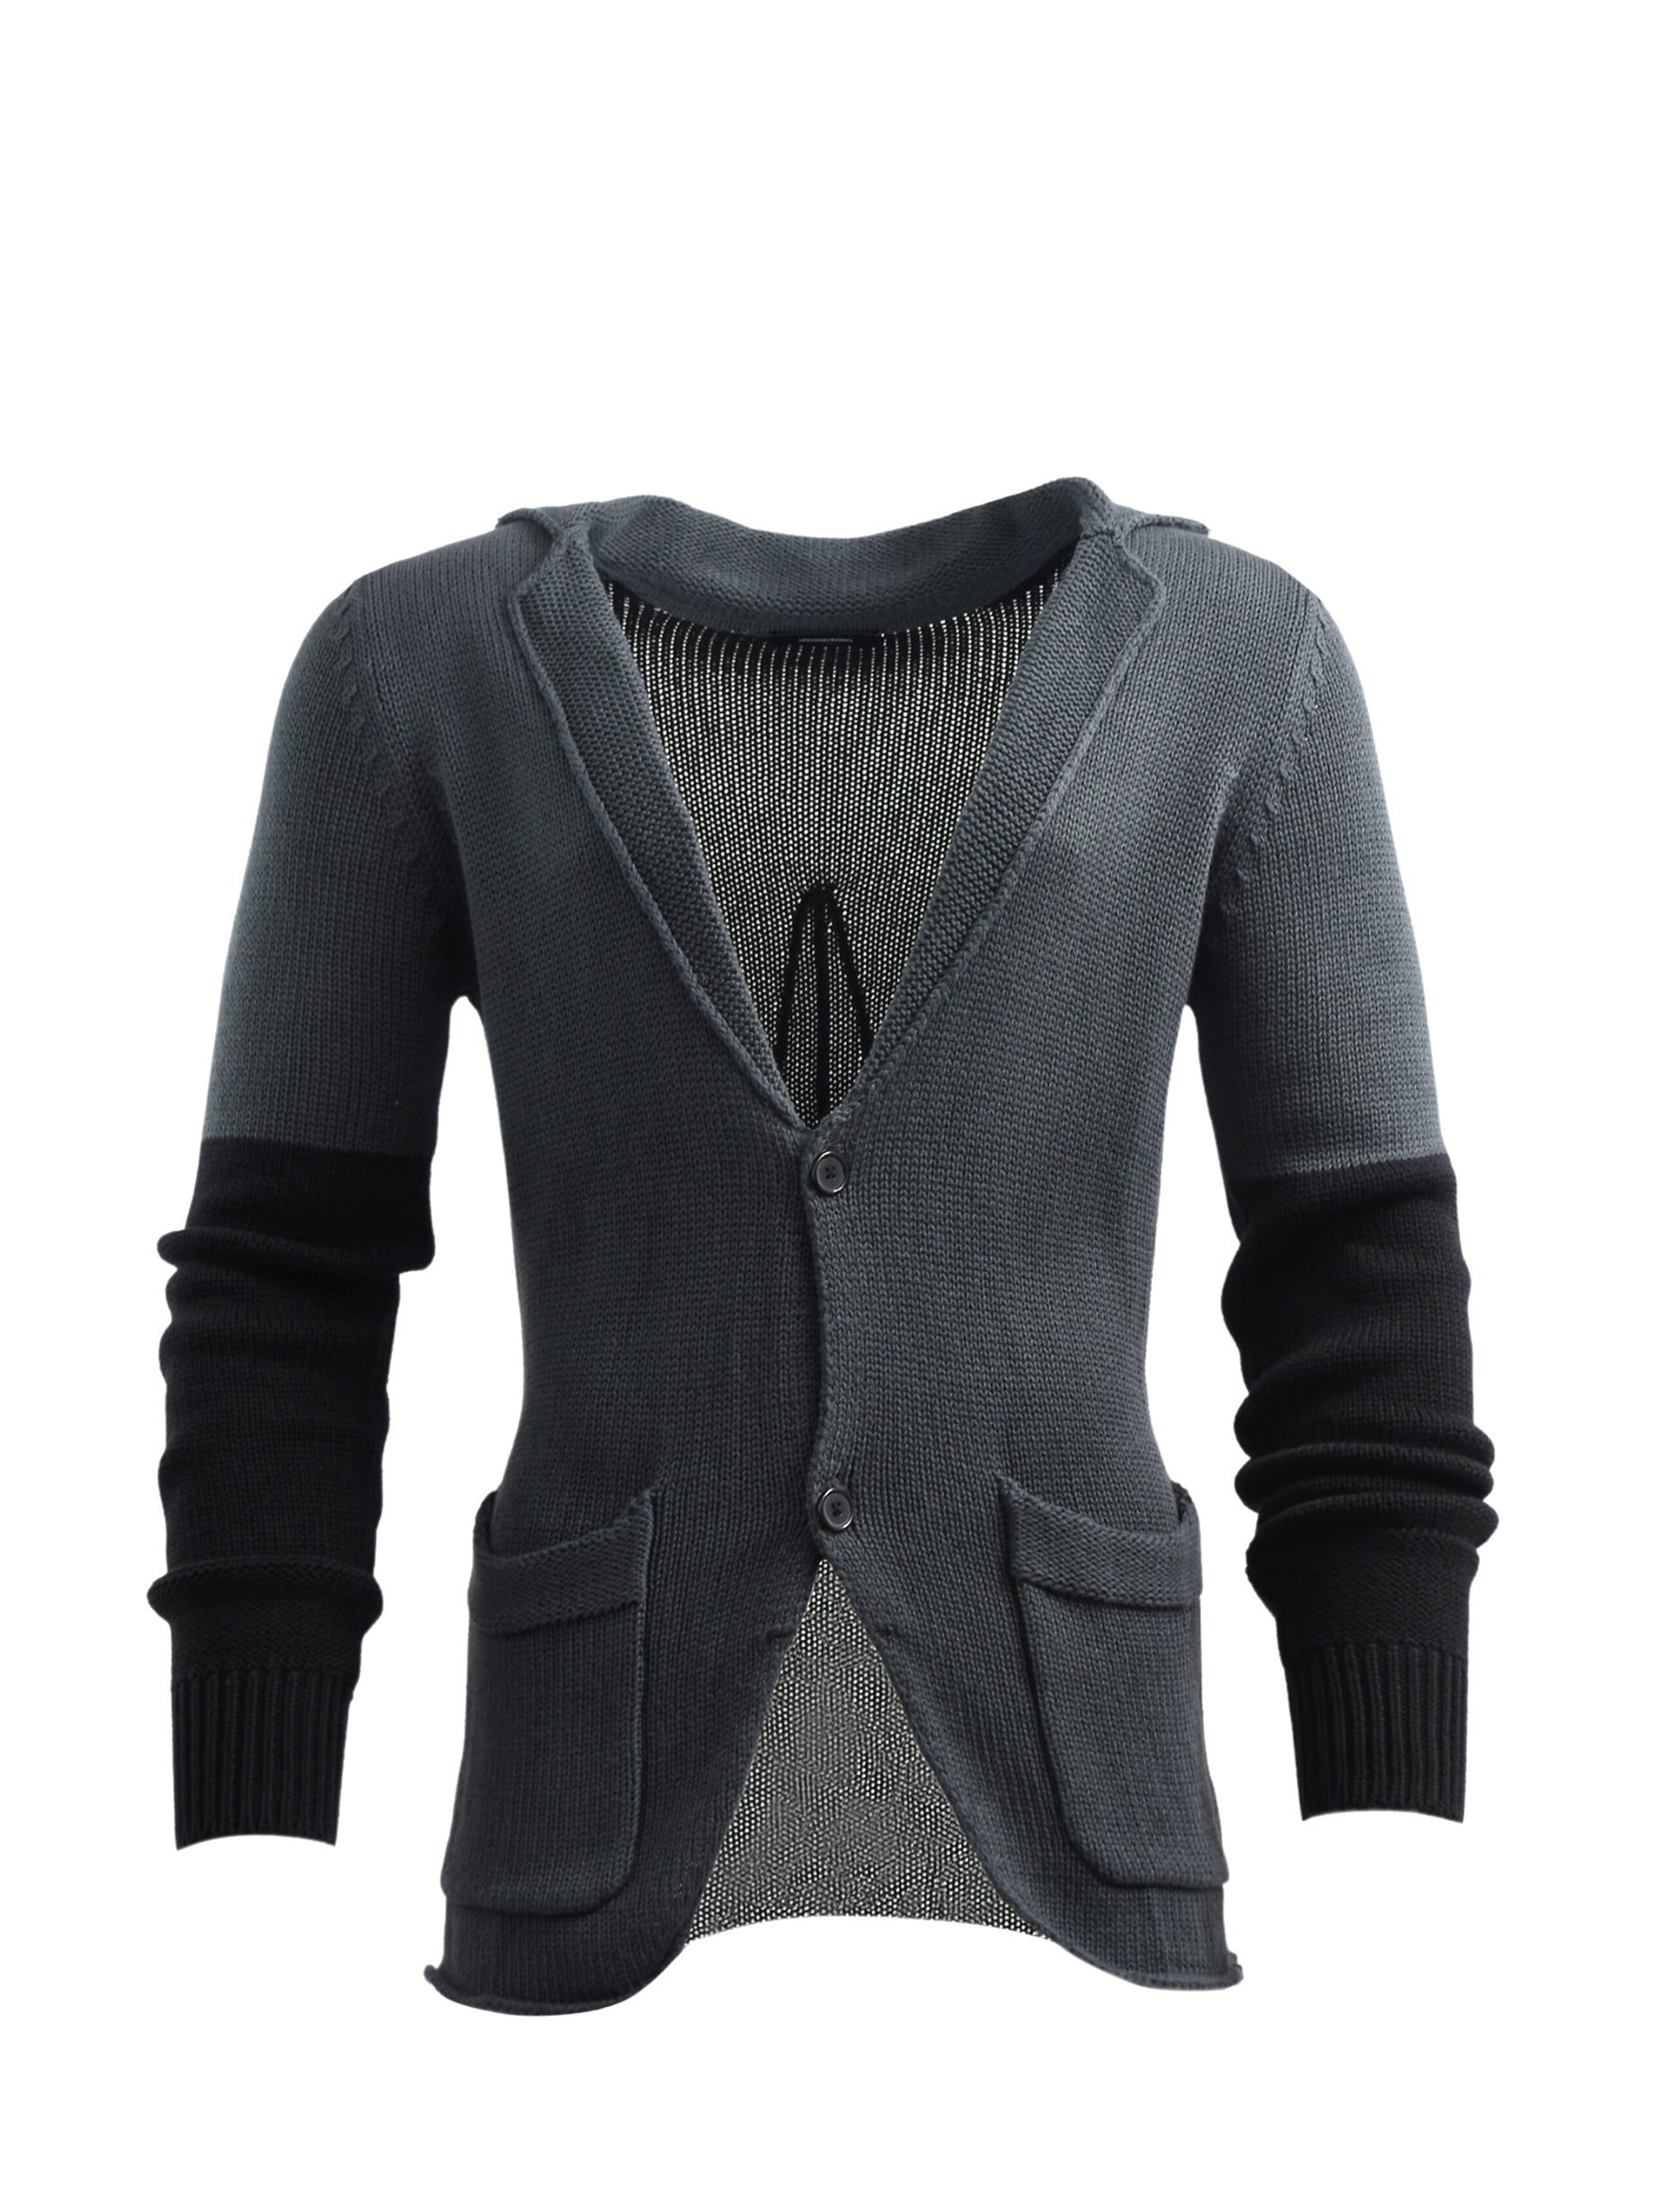 TWO-TONE CARDIGAN WITH FRONT POCKETS